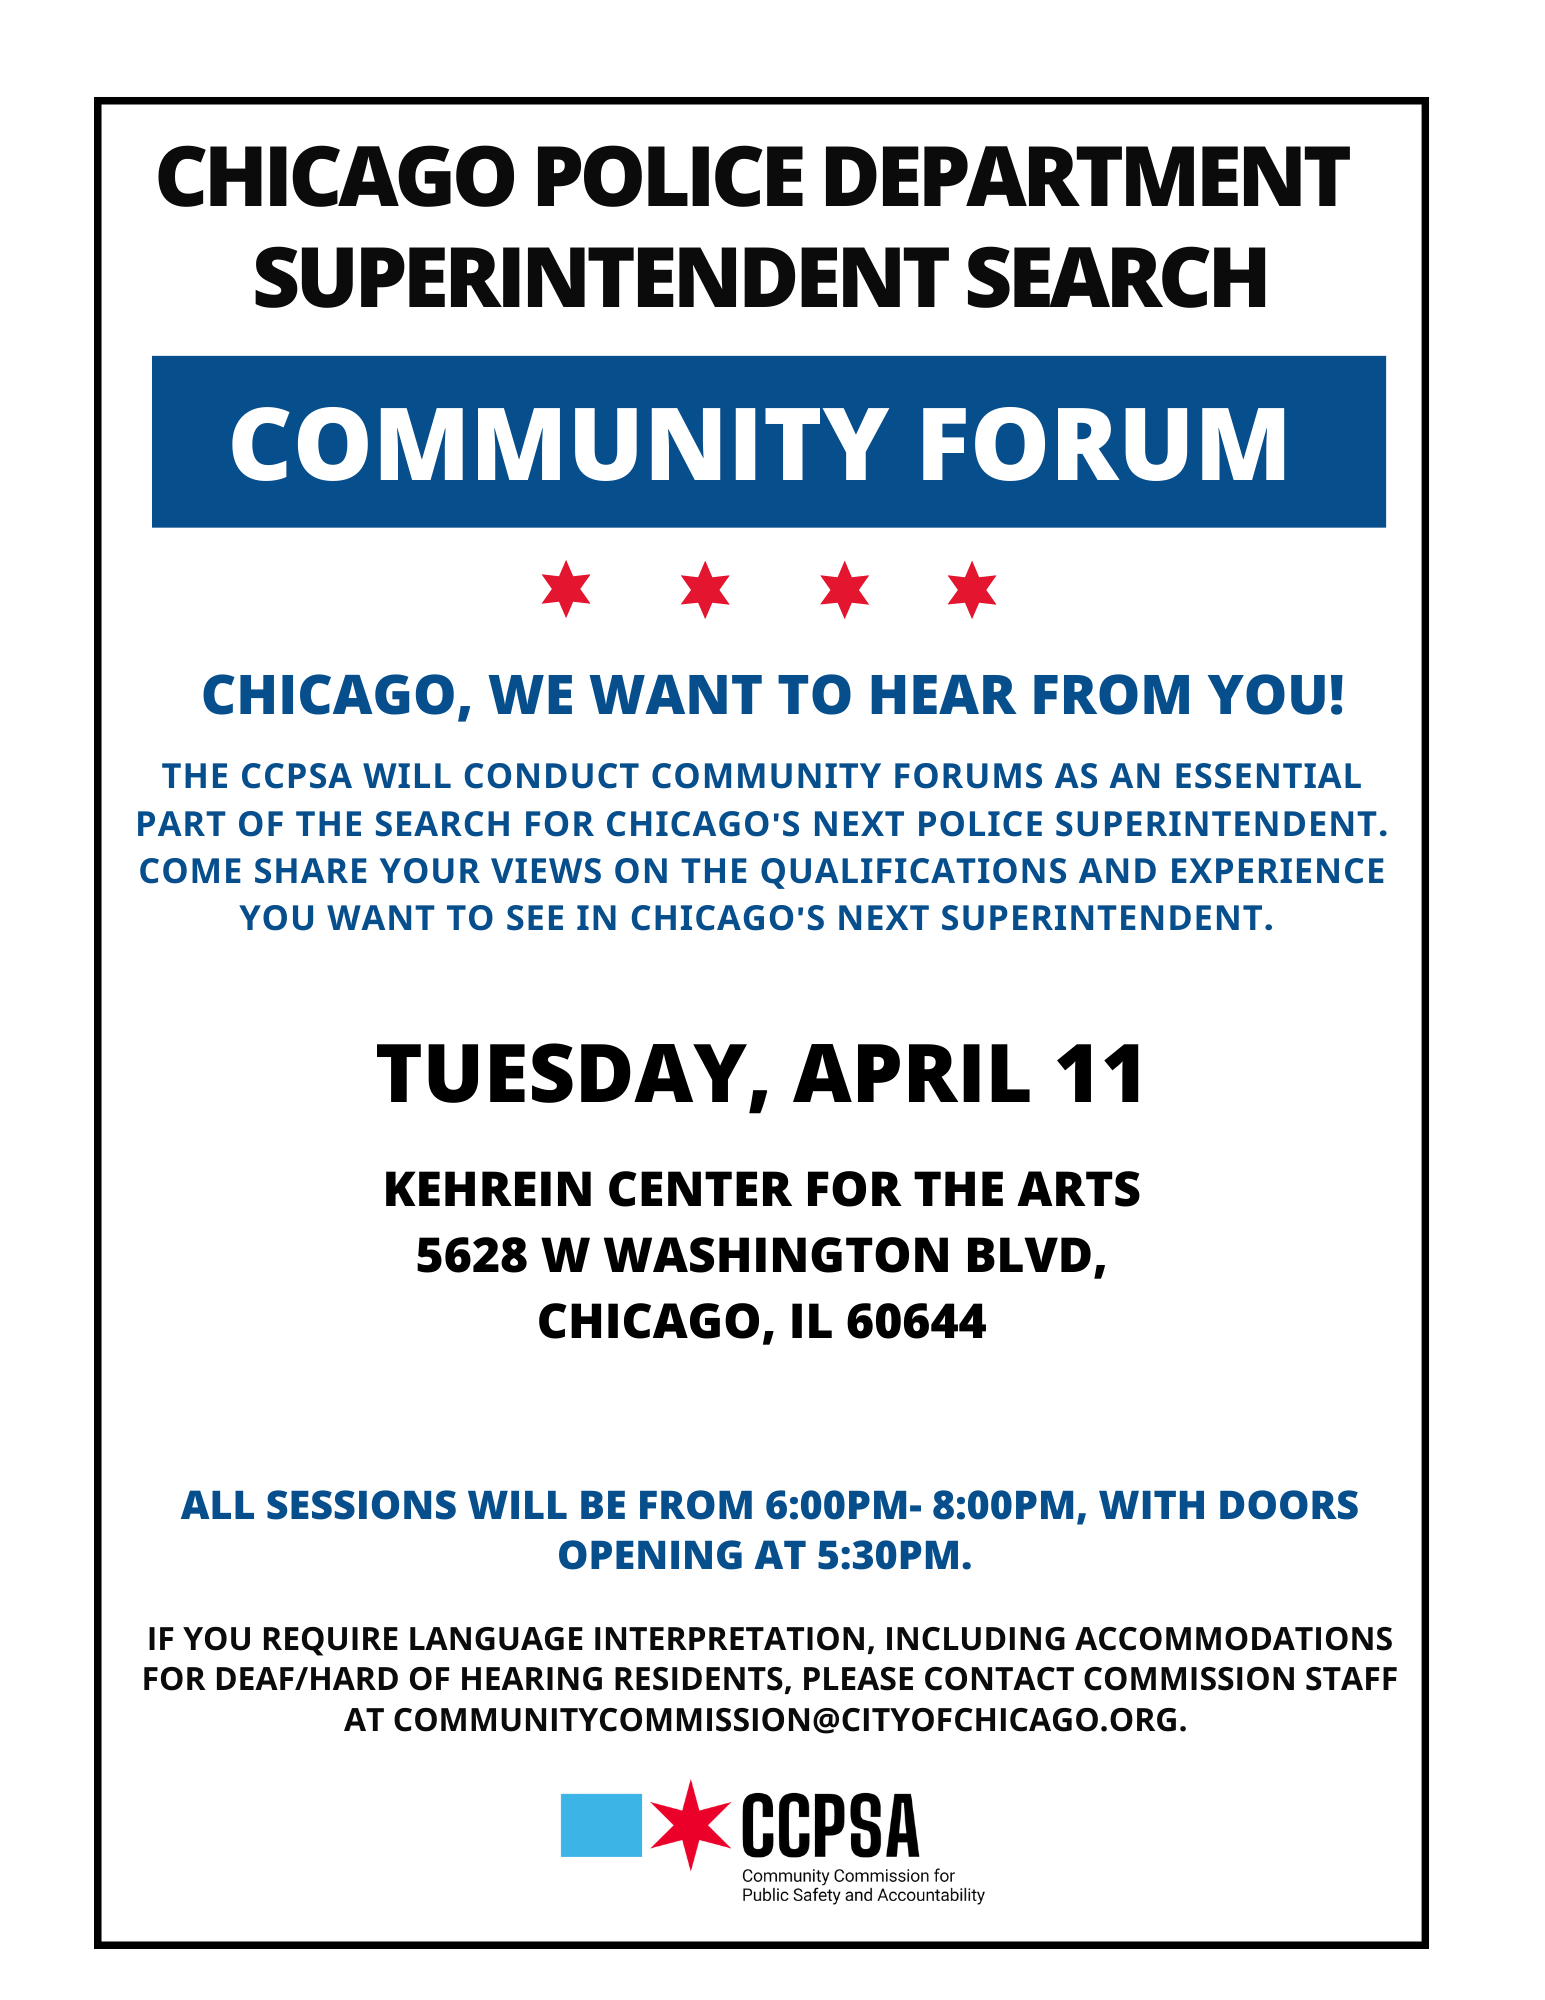 Chicago Police Department Superintendent Search Community Forum